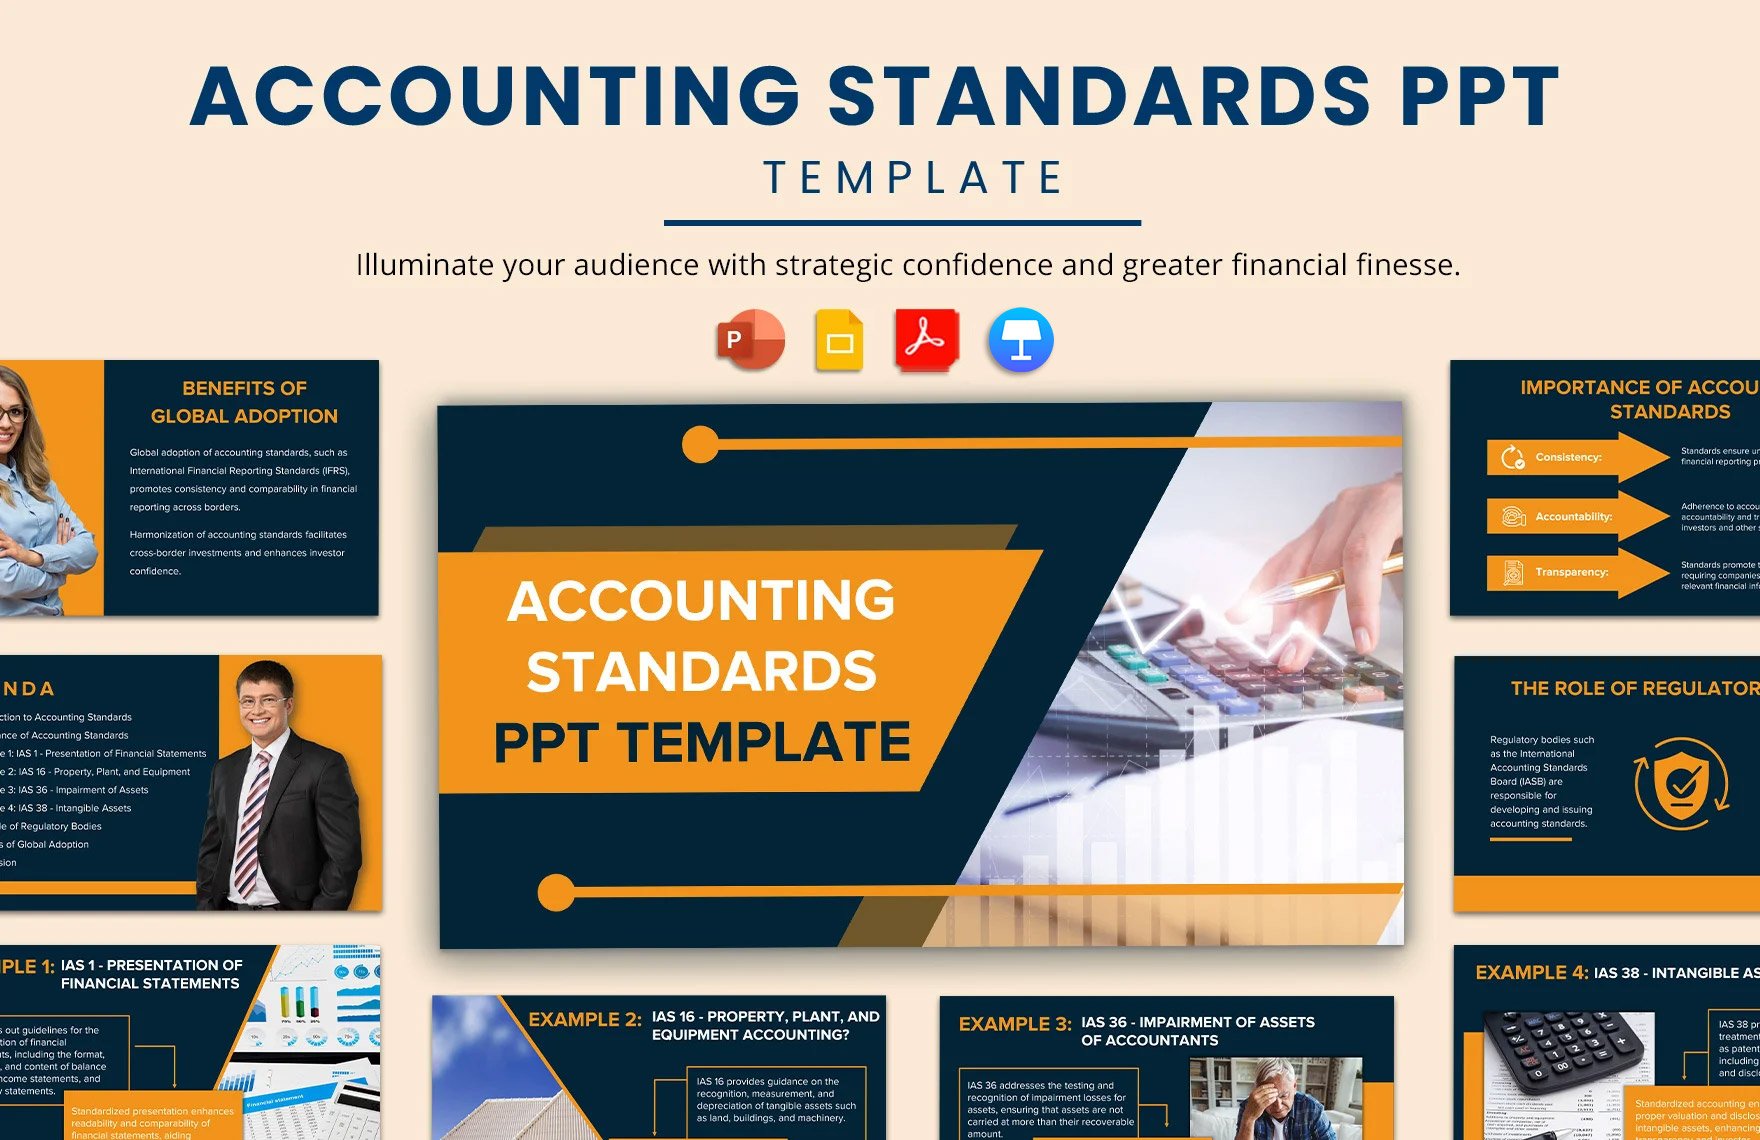 Accounting Standards PPT Template in PDF, PowerPoint, Google Slides, Apple Keynote